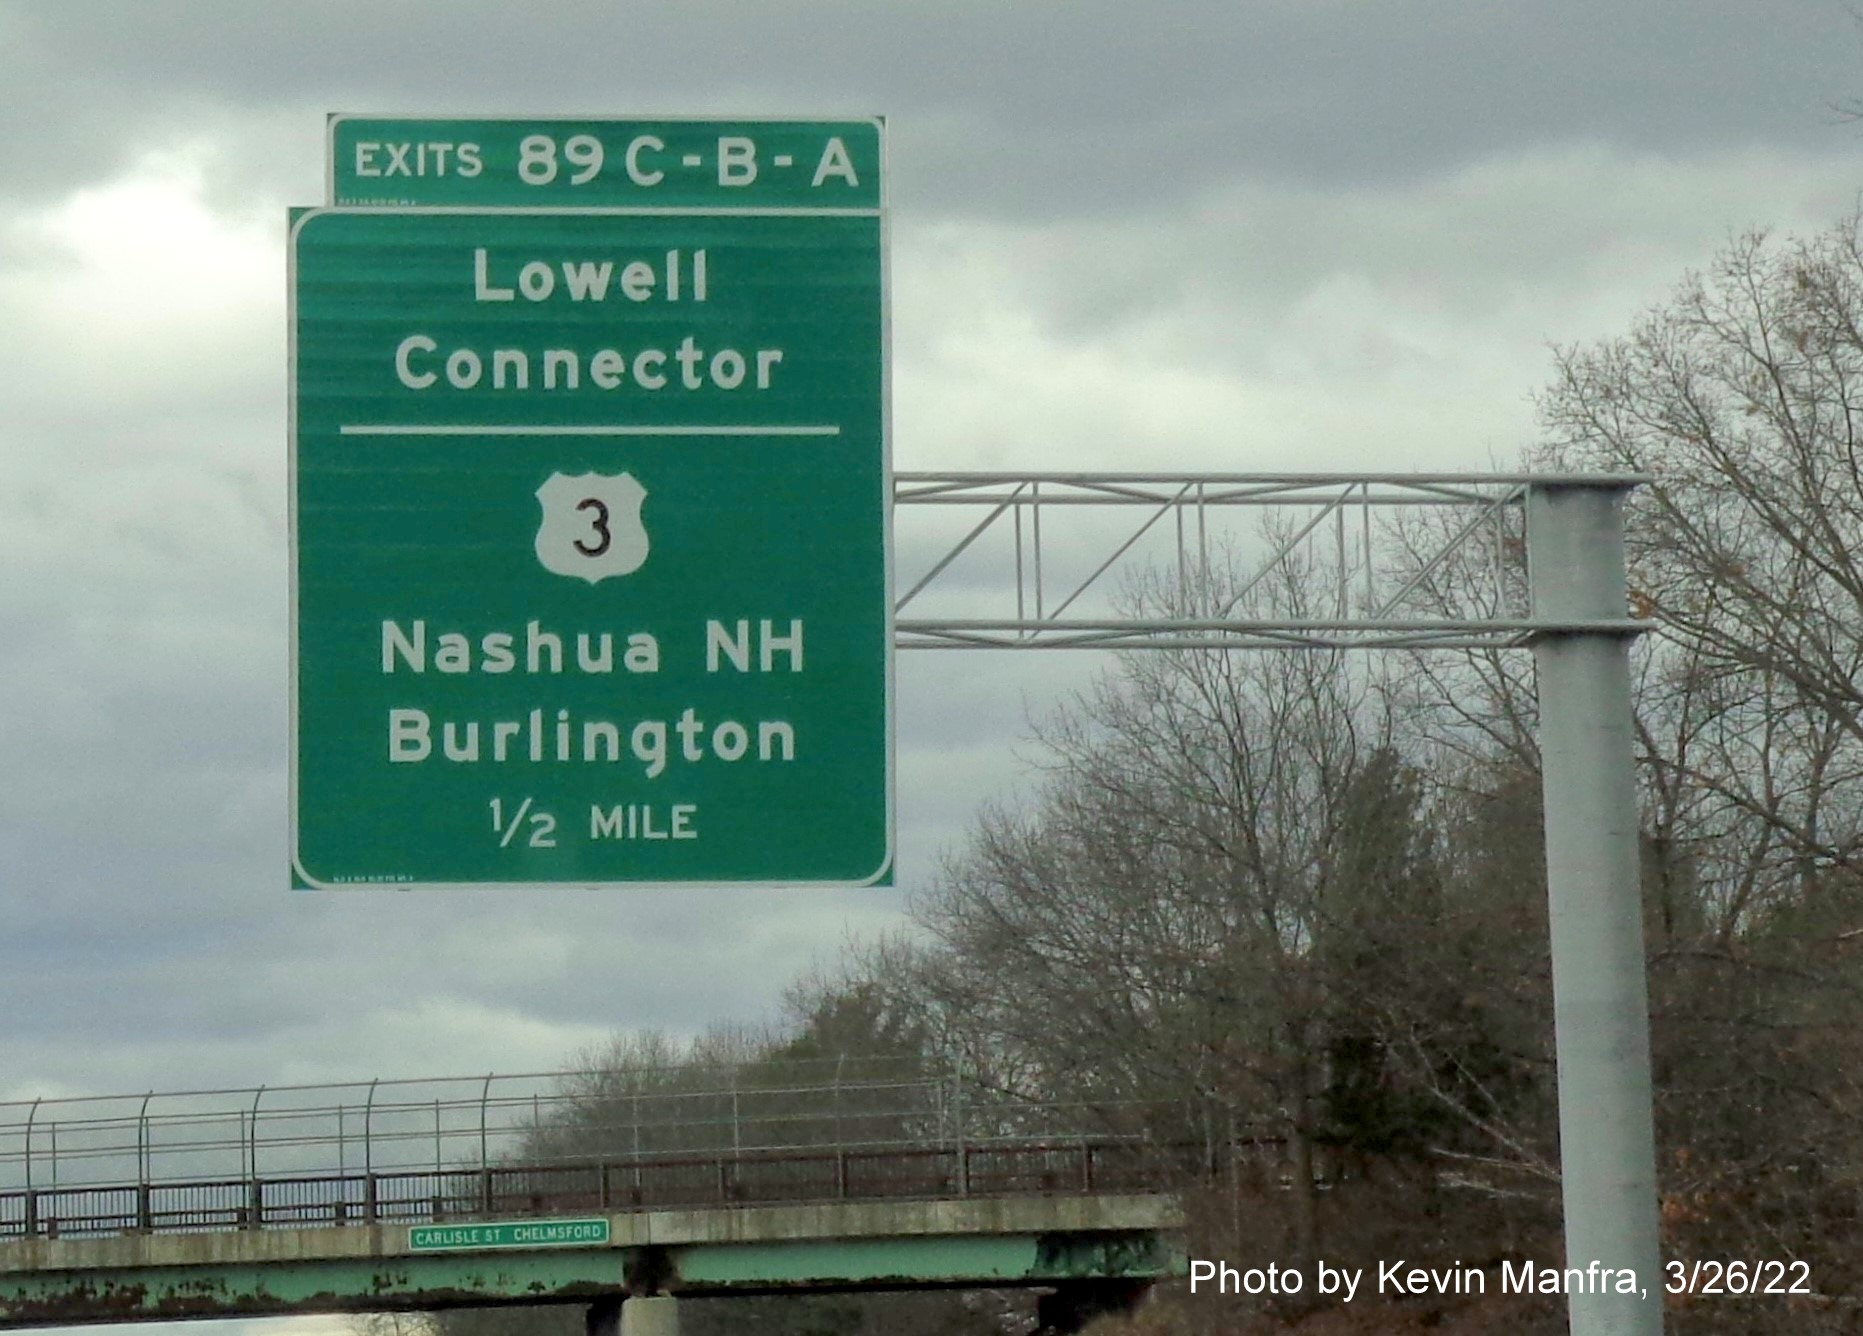 Image of recently placed new 1/2 mile advance overhead sign for Lowell Connector/US 3 exits on I-495 South in Chelmsford, by Kevin Manfra, March 2022